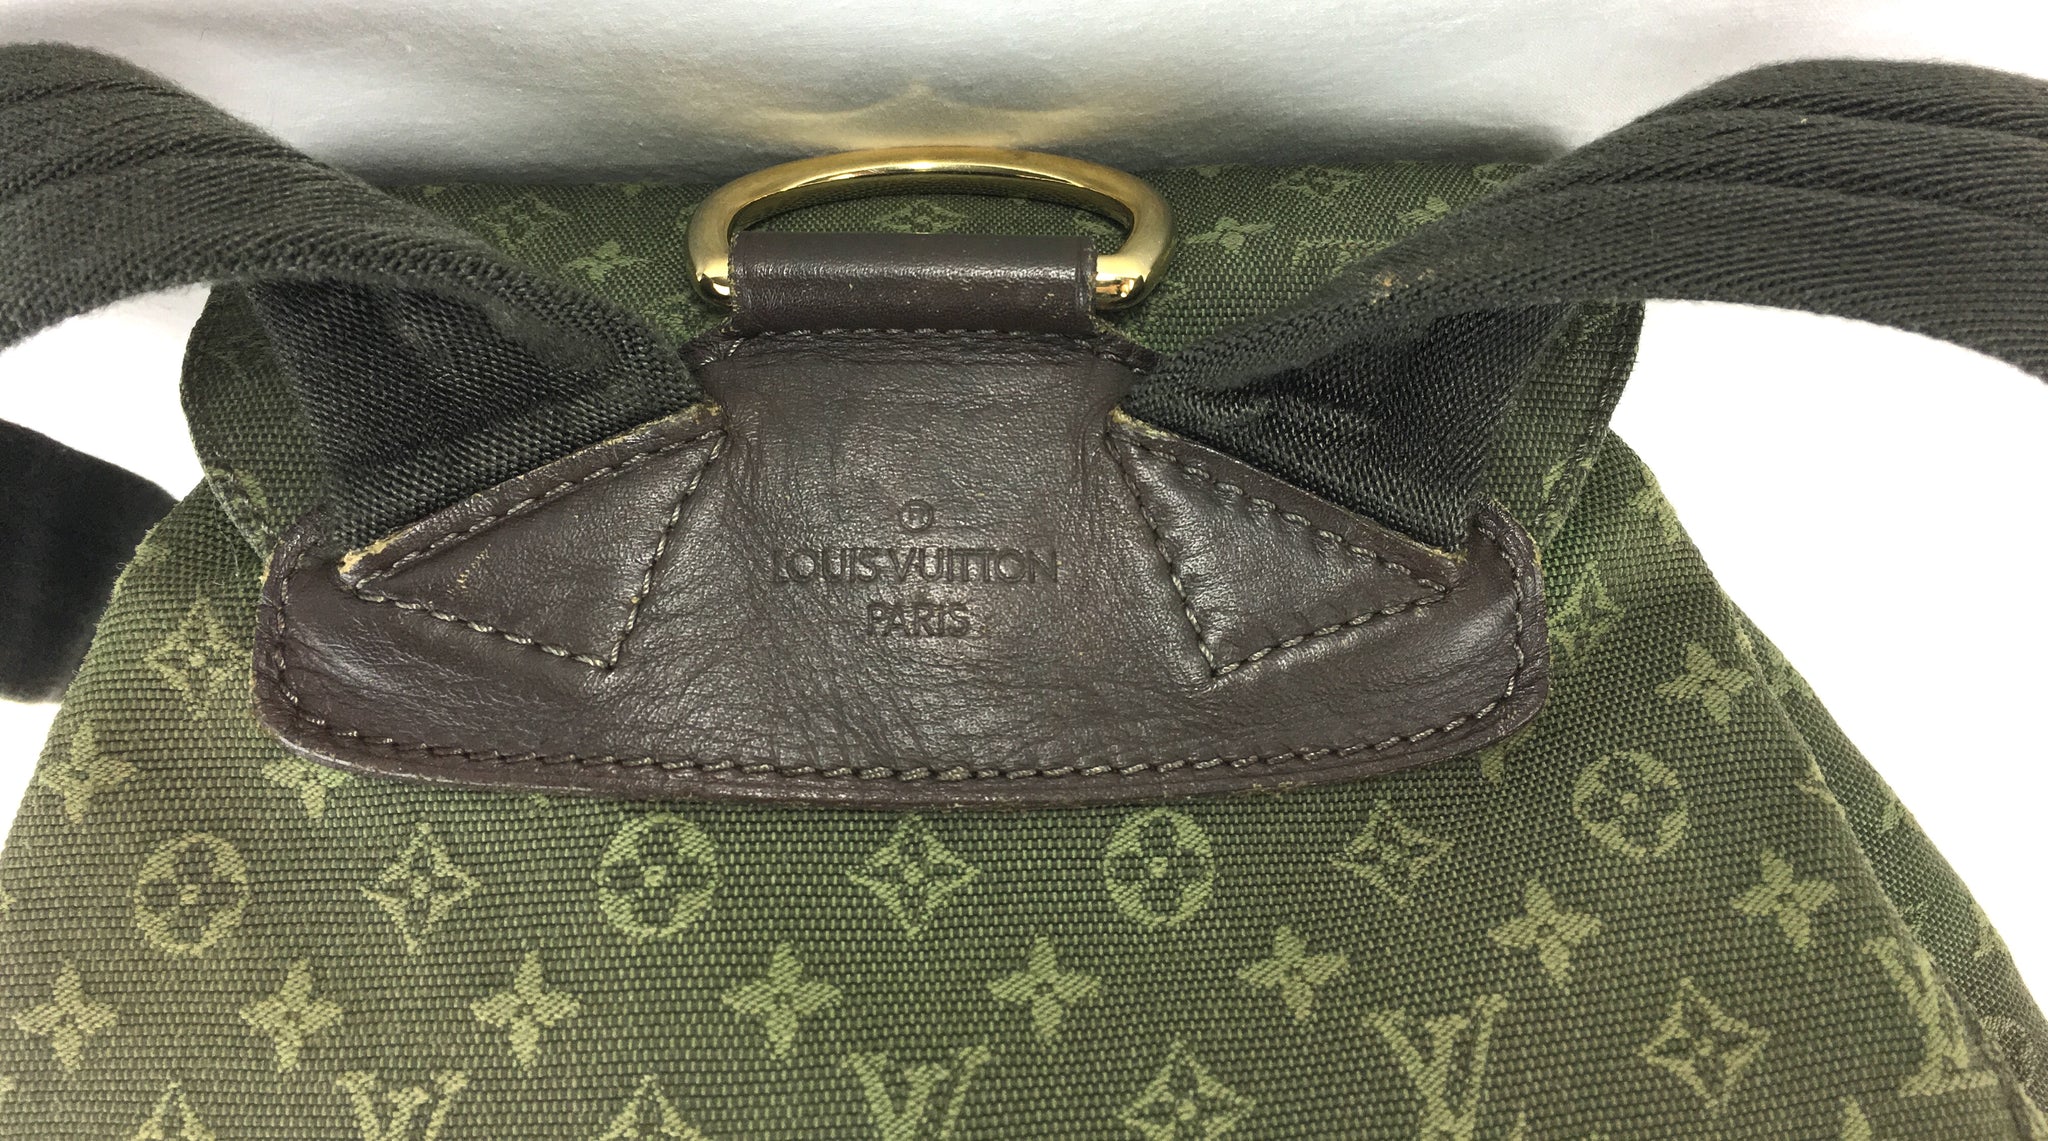 Louis Vuitton Montsouris Backpack NM Monogram Canvas with Leather BB -  ShopStyle